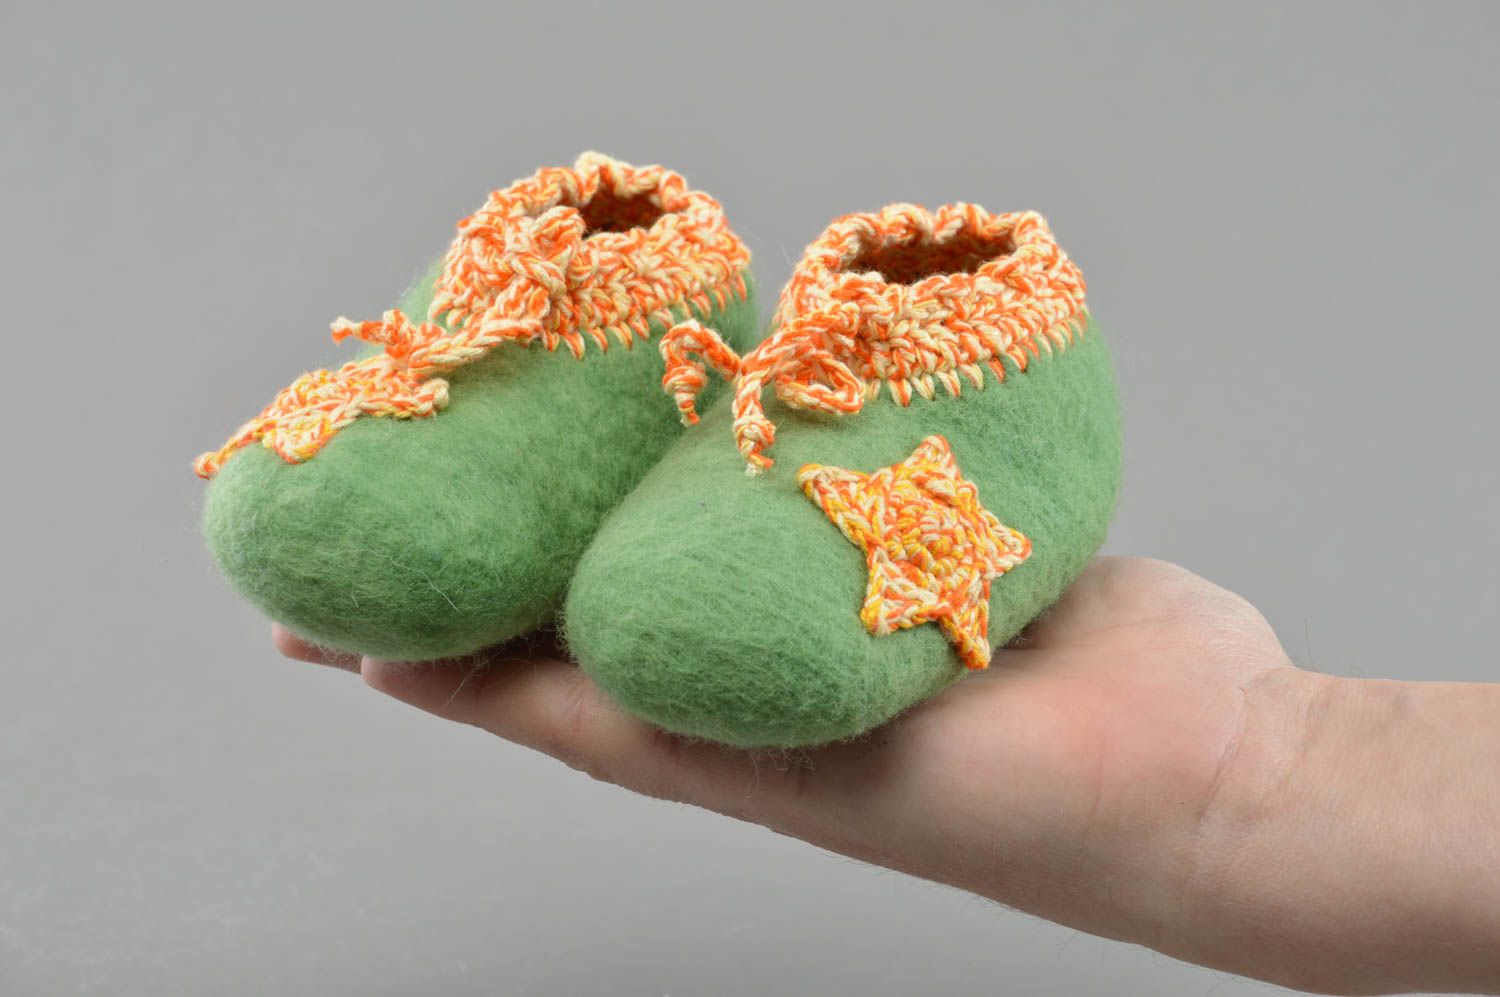 Handmade designer felted wool light green baby booties with crocheted edges photo 4